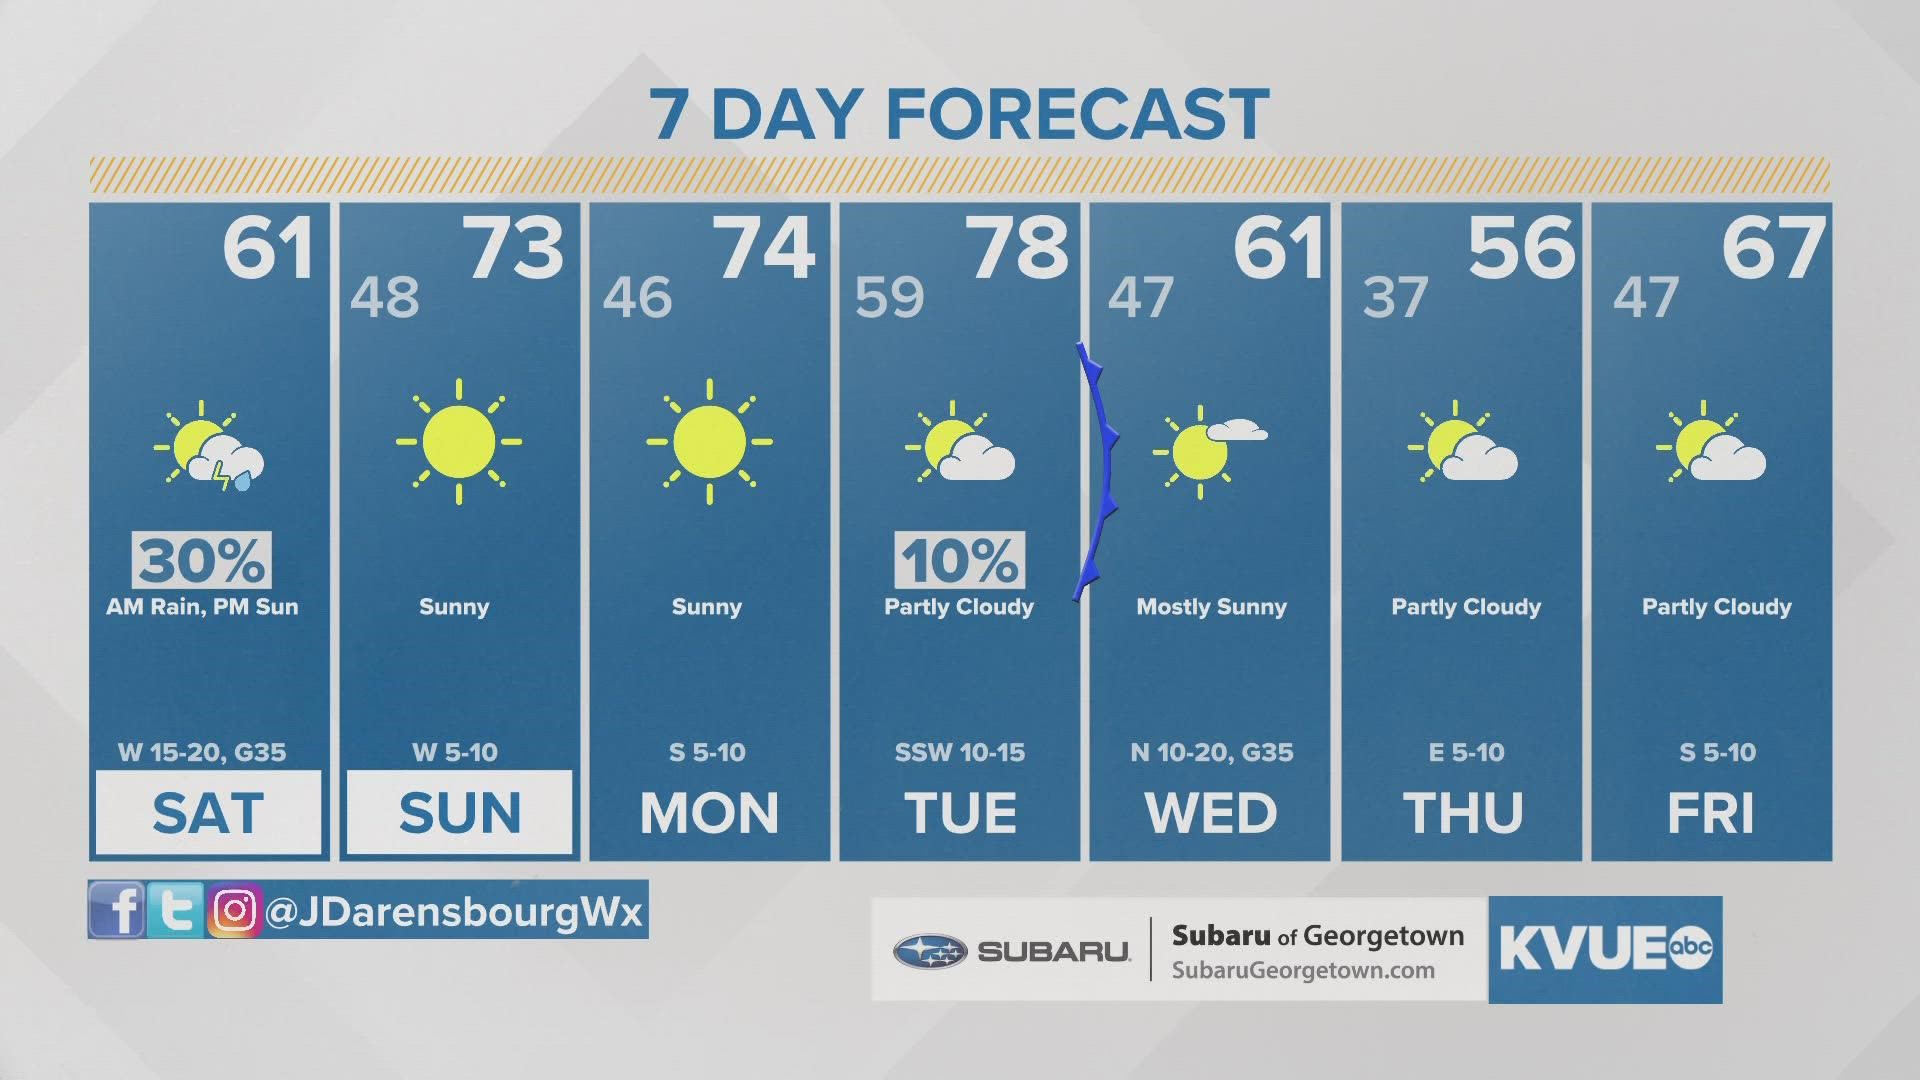 Drying trend Saturday, warming trend Sunday